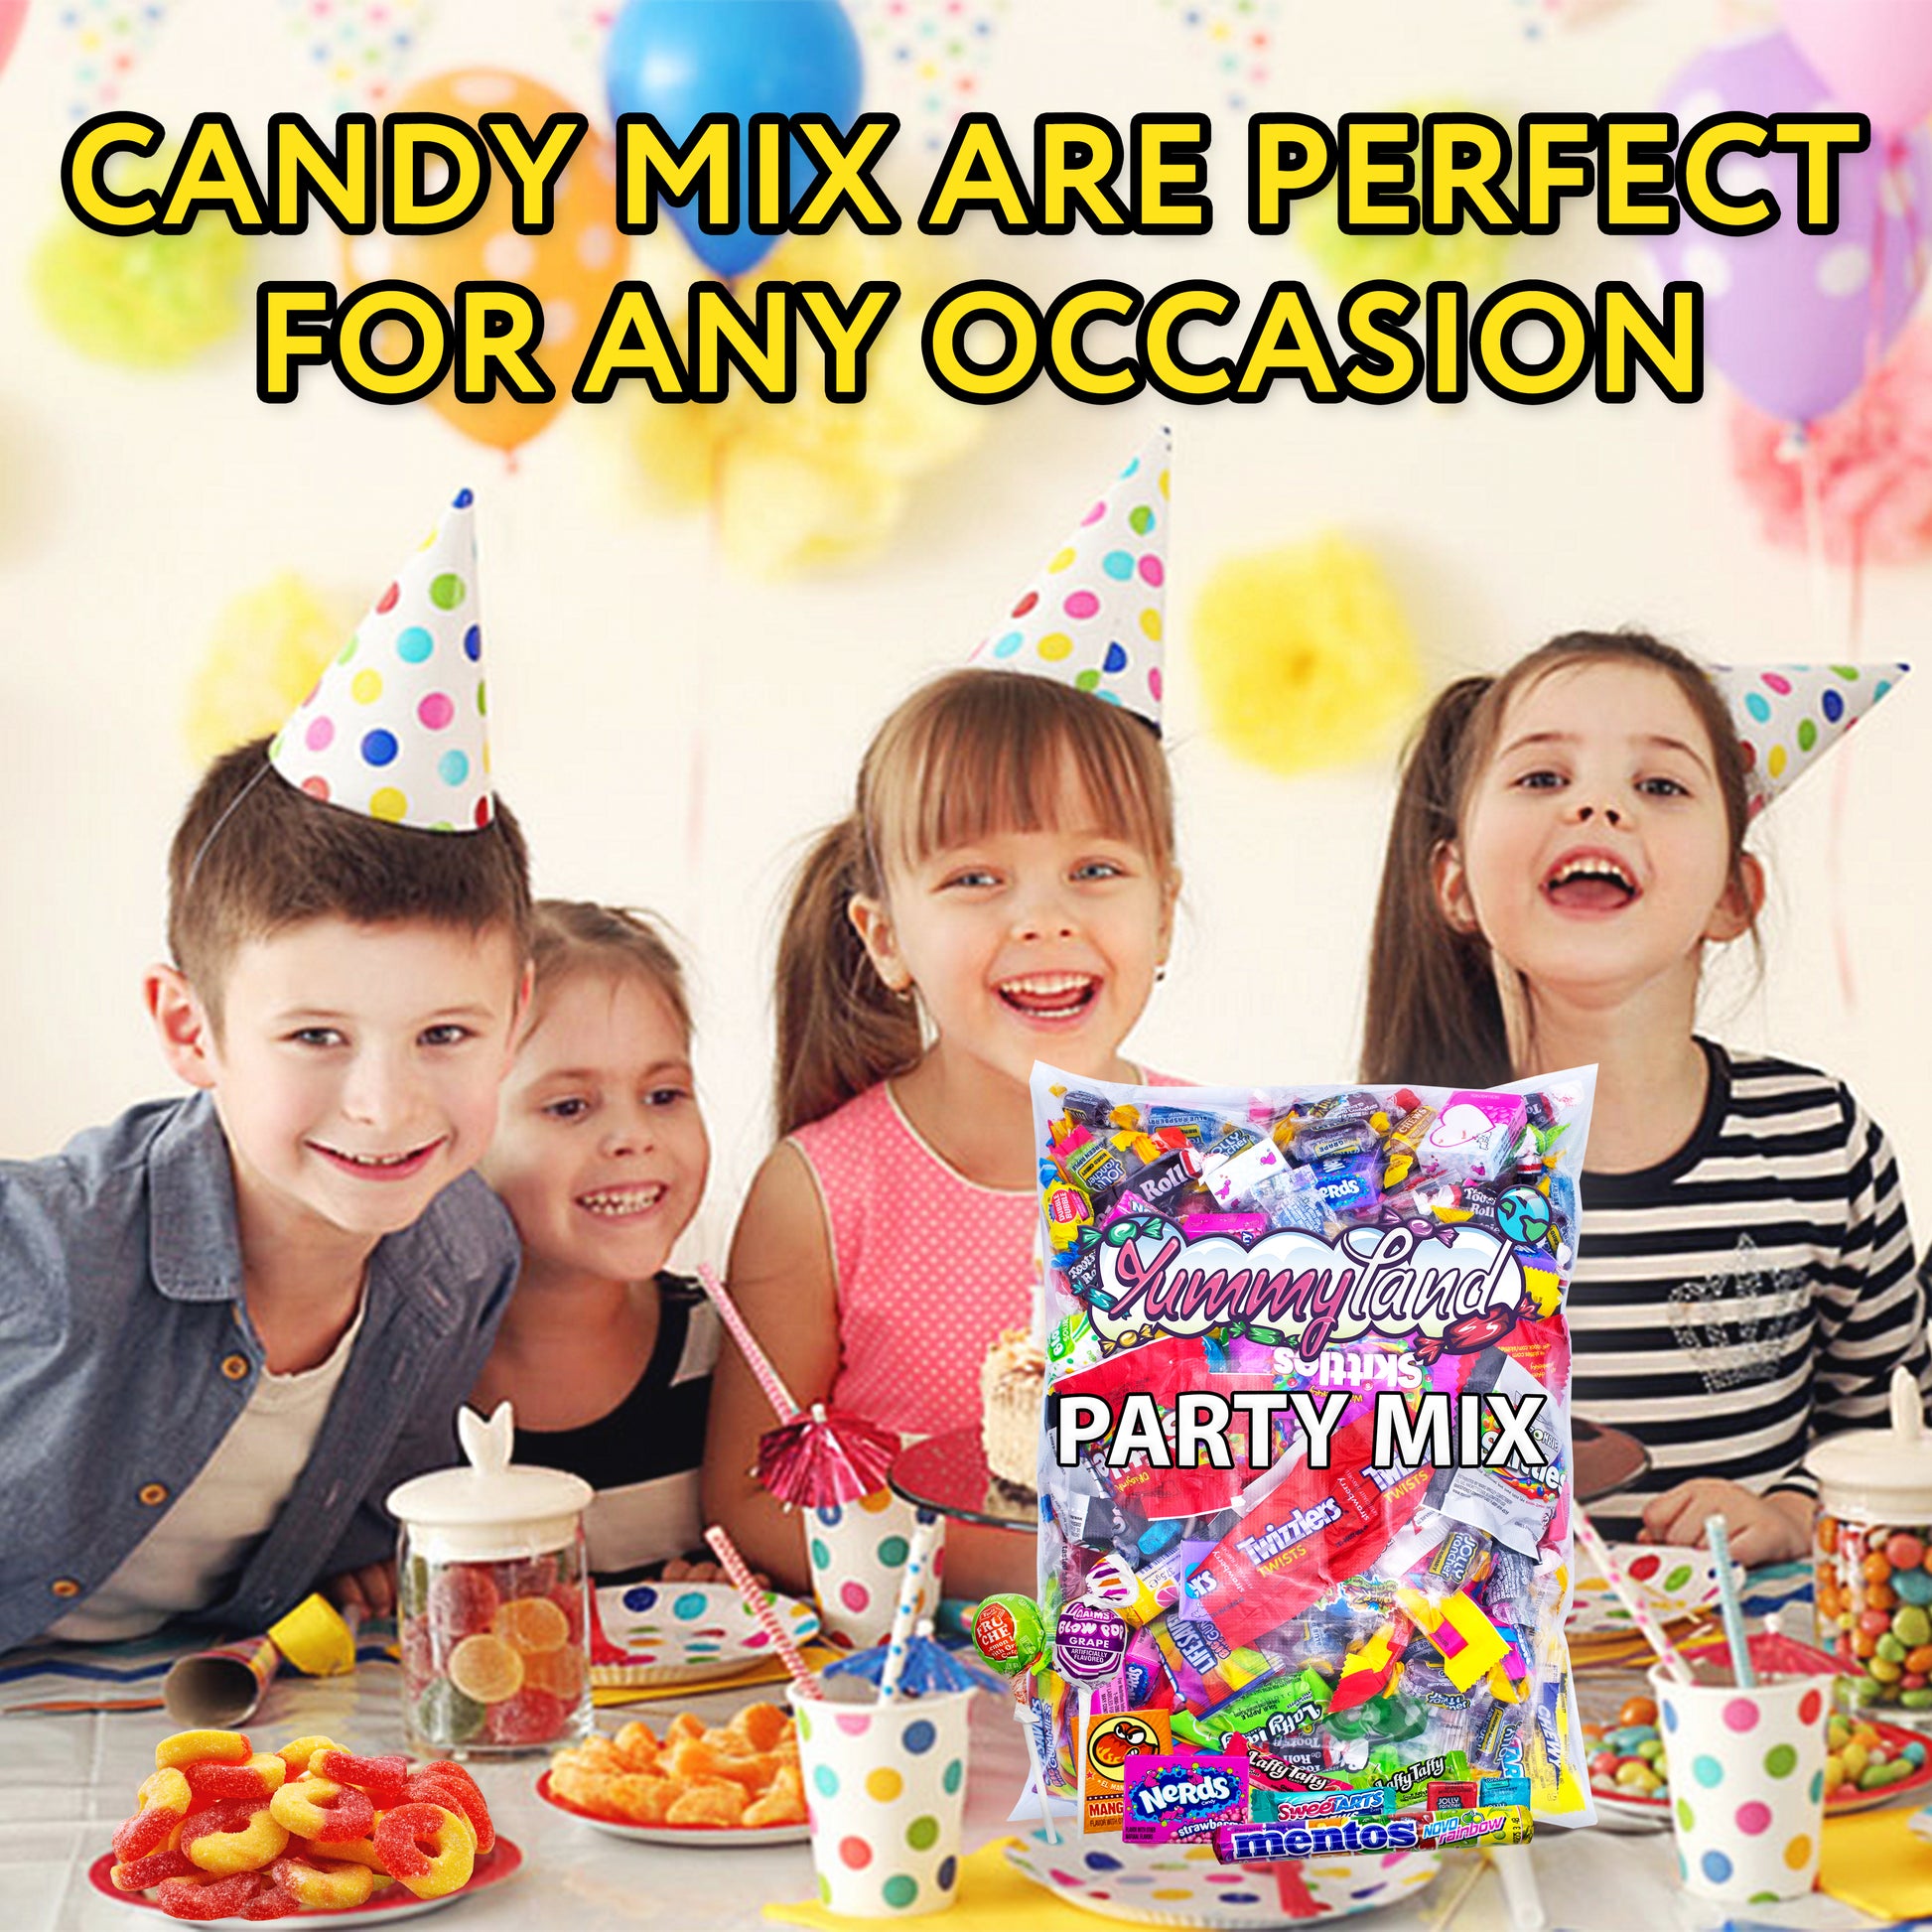 Assorted Candy - 4 Pounds - Bulk Candy - Party Mix - Goodie Bag Stuffers -  Candy Variety Pack - Pinata Candy - Individually Wrapped Candies - Fun Size  Candy - Bag Candy